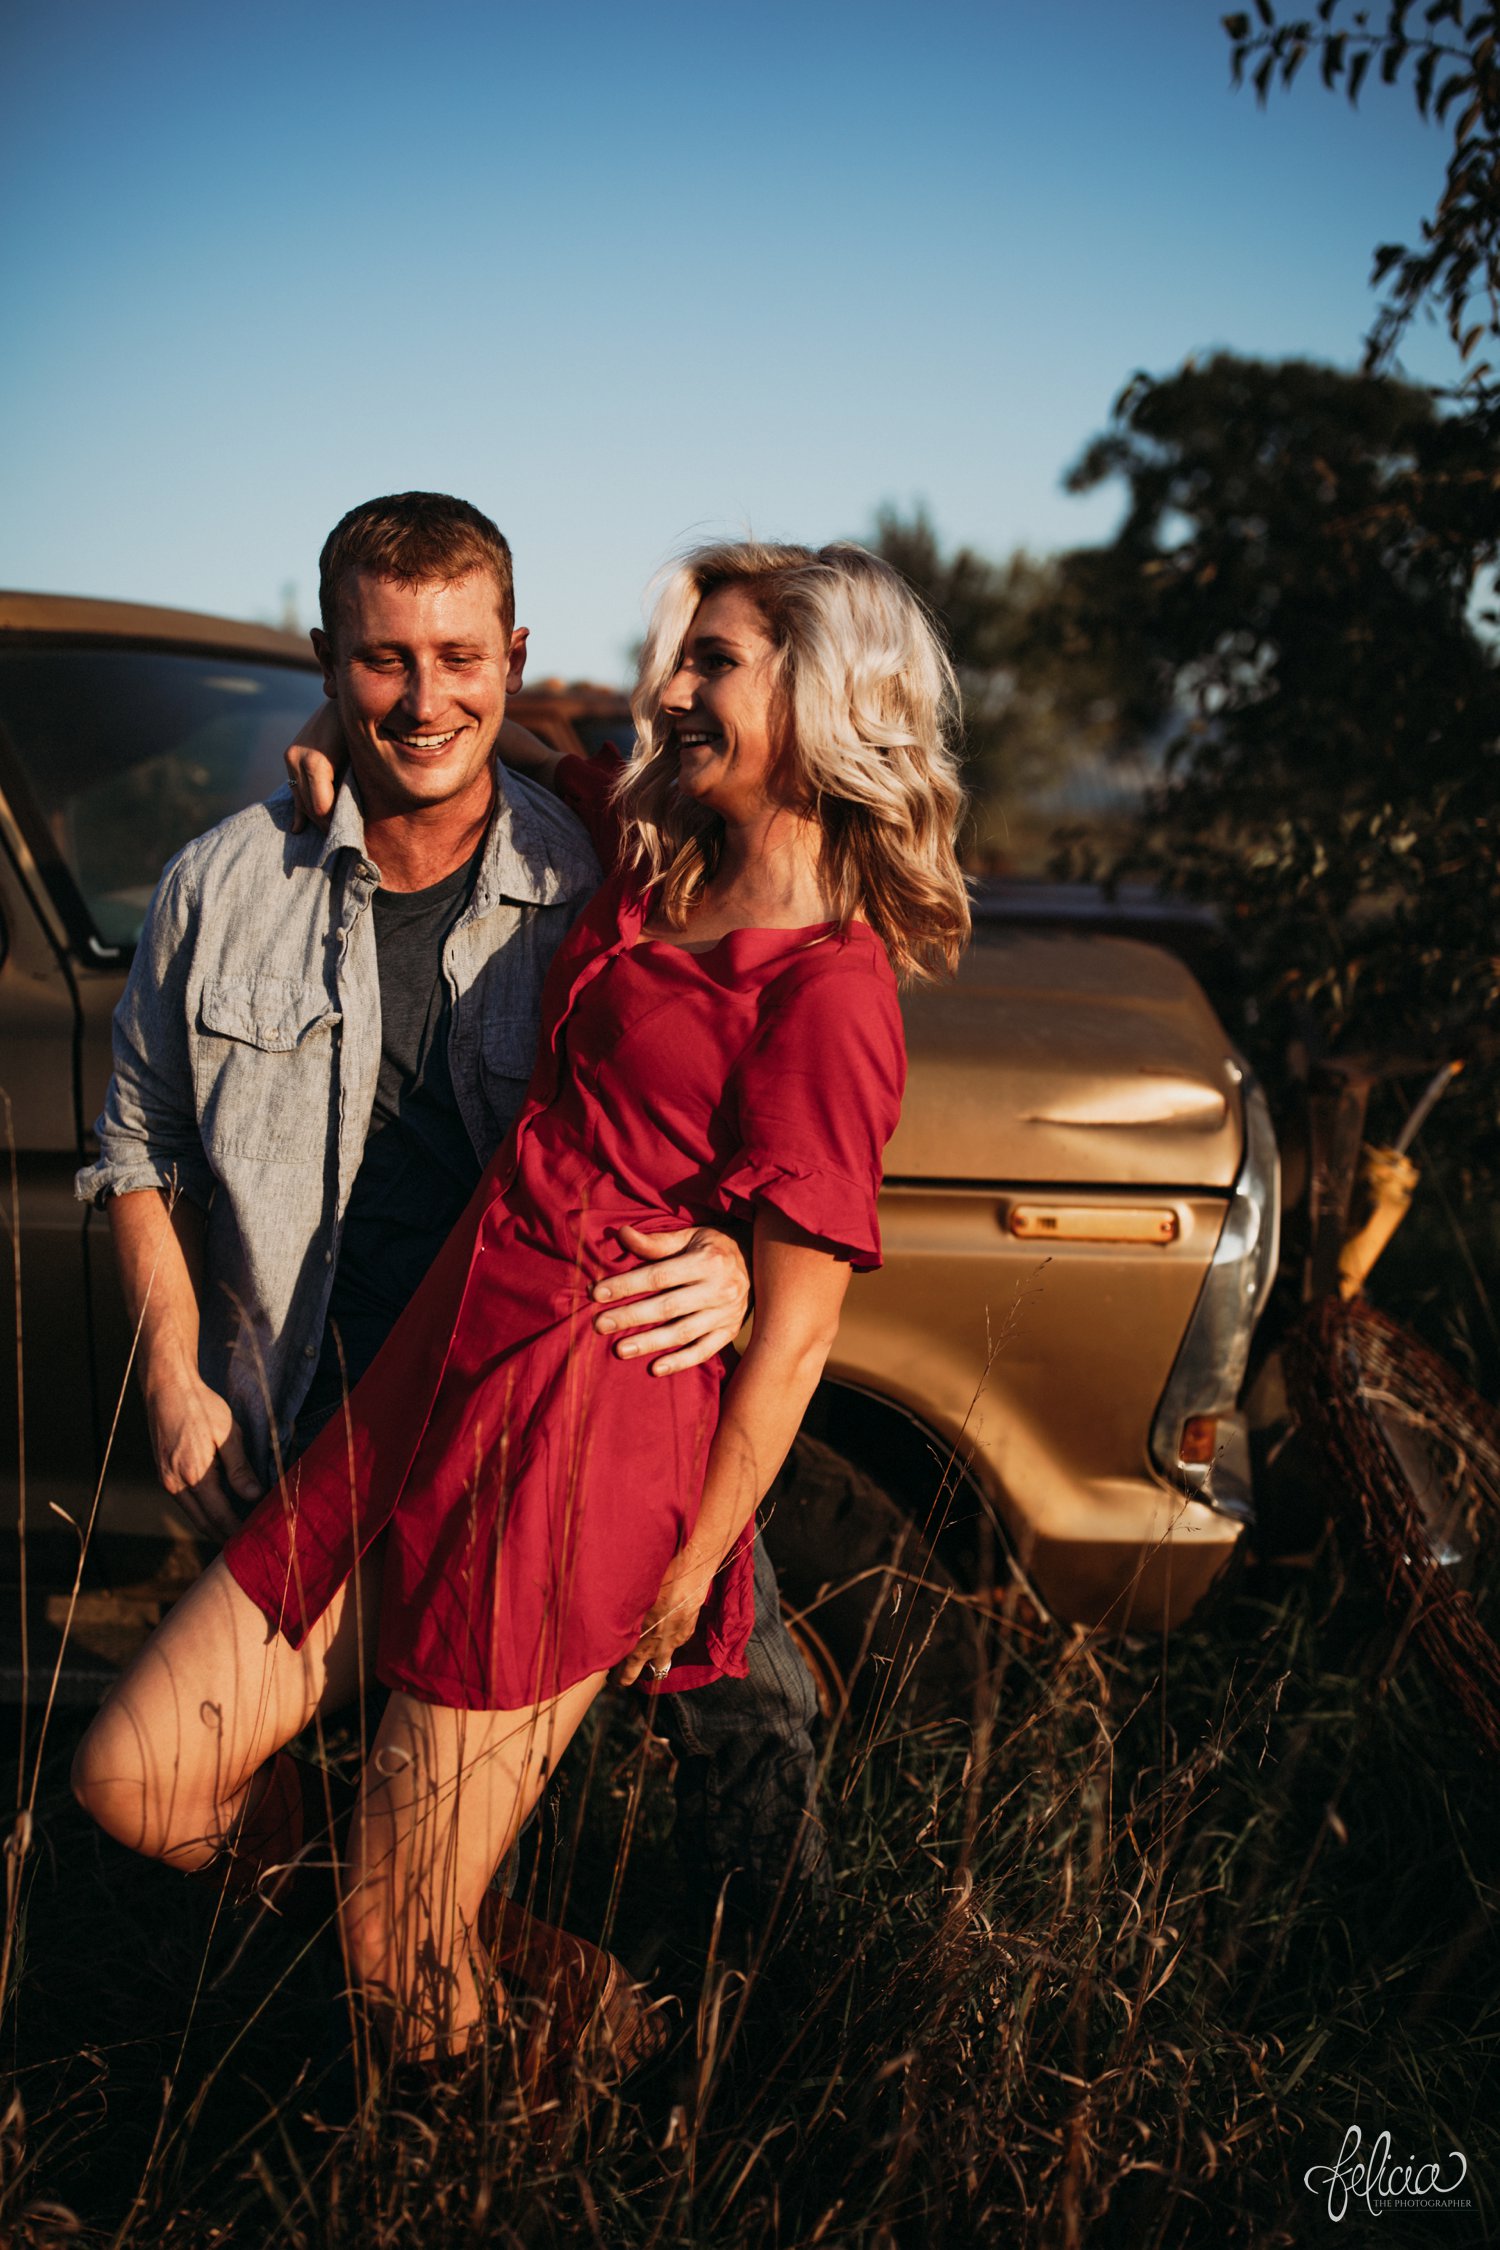 images by feliciathephotographer.com | destination wedding photographer | engagement | farmhouse | country | kansas city | sweet southern | red dress | nordstrom rack | unique halo diamond ring | casual | brown boots | amazon | cowboy | vintage truck | dirt road | golden hour | 